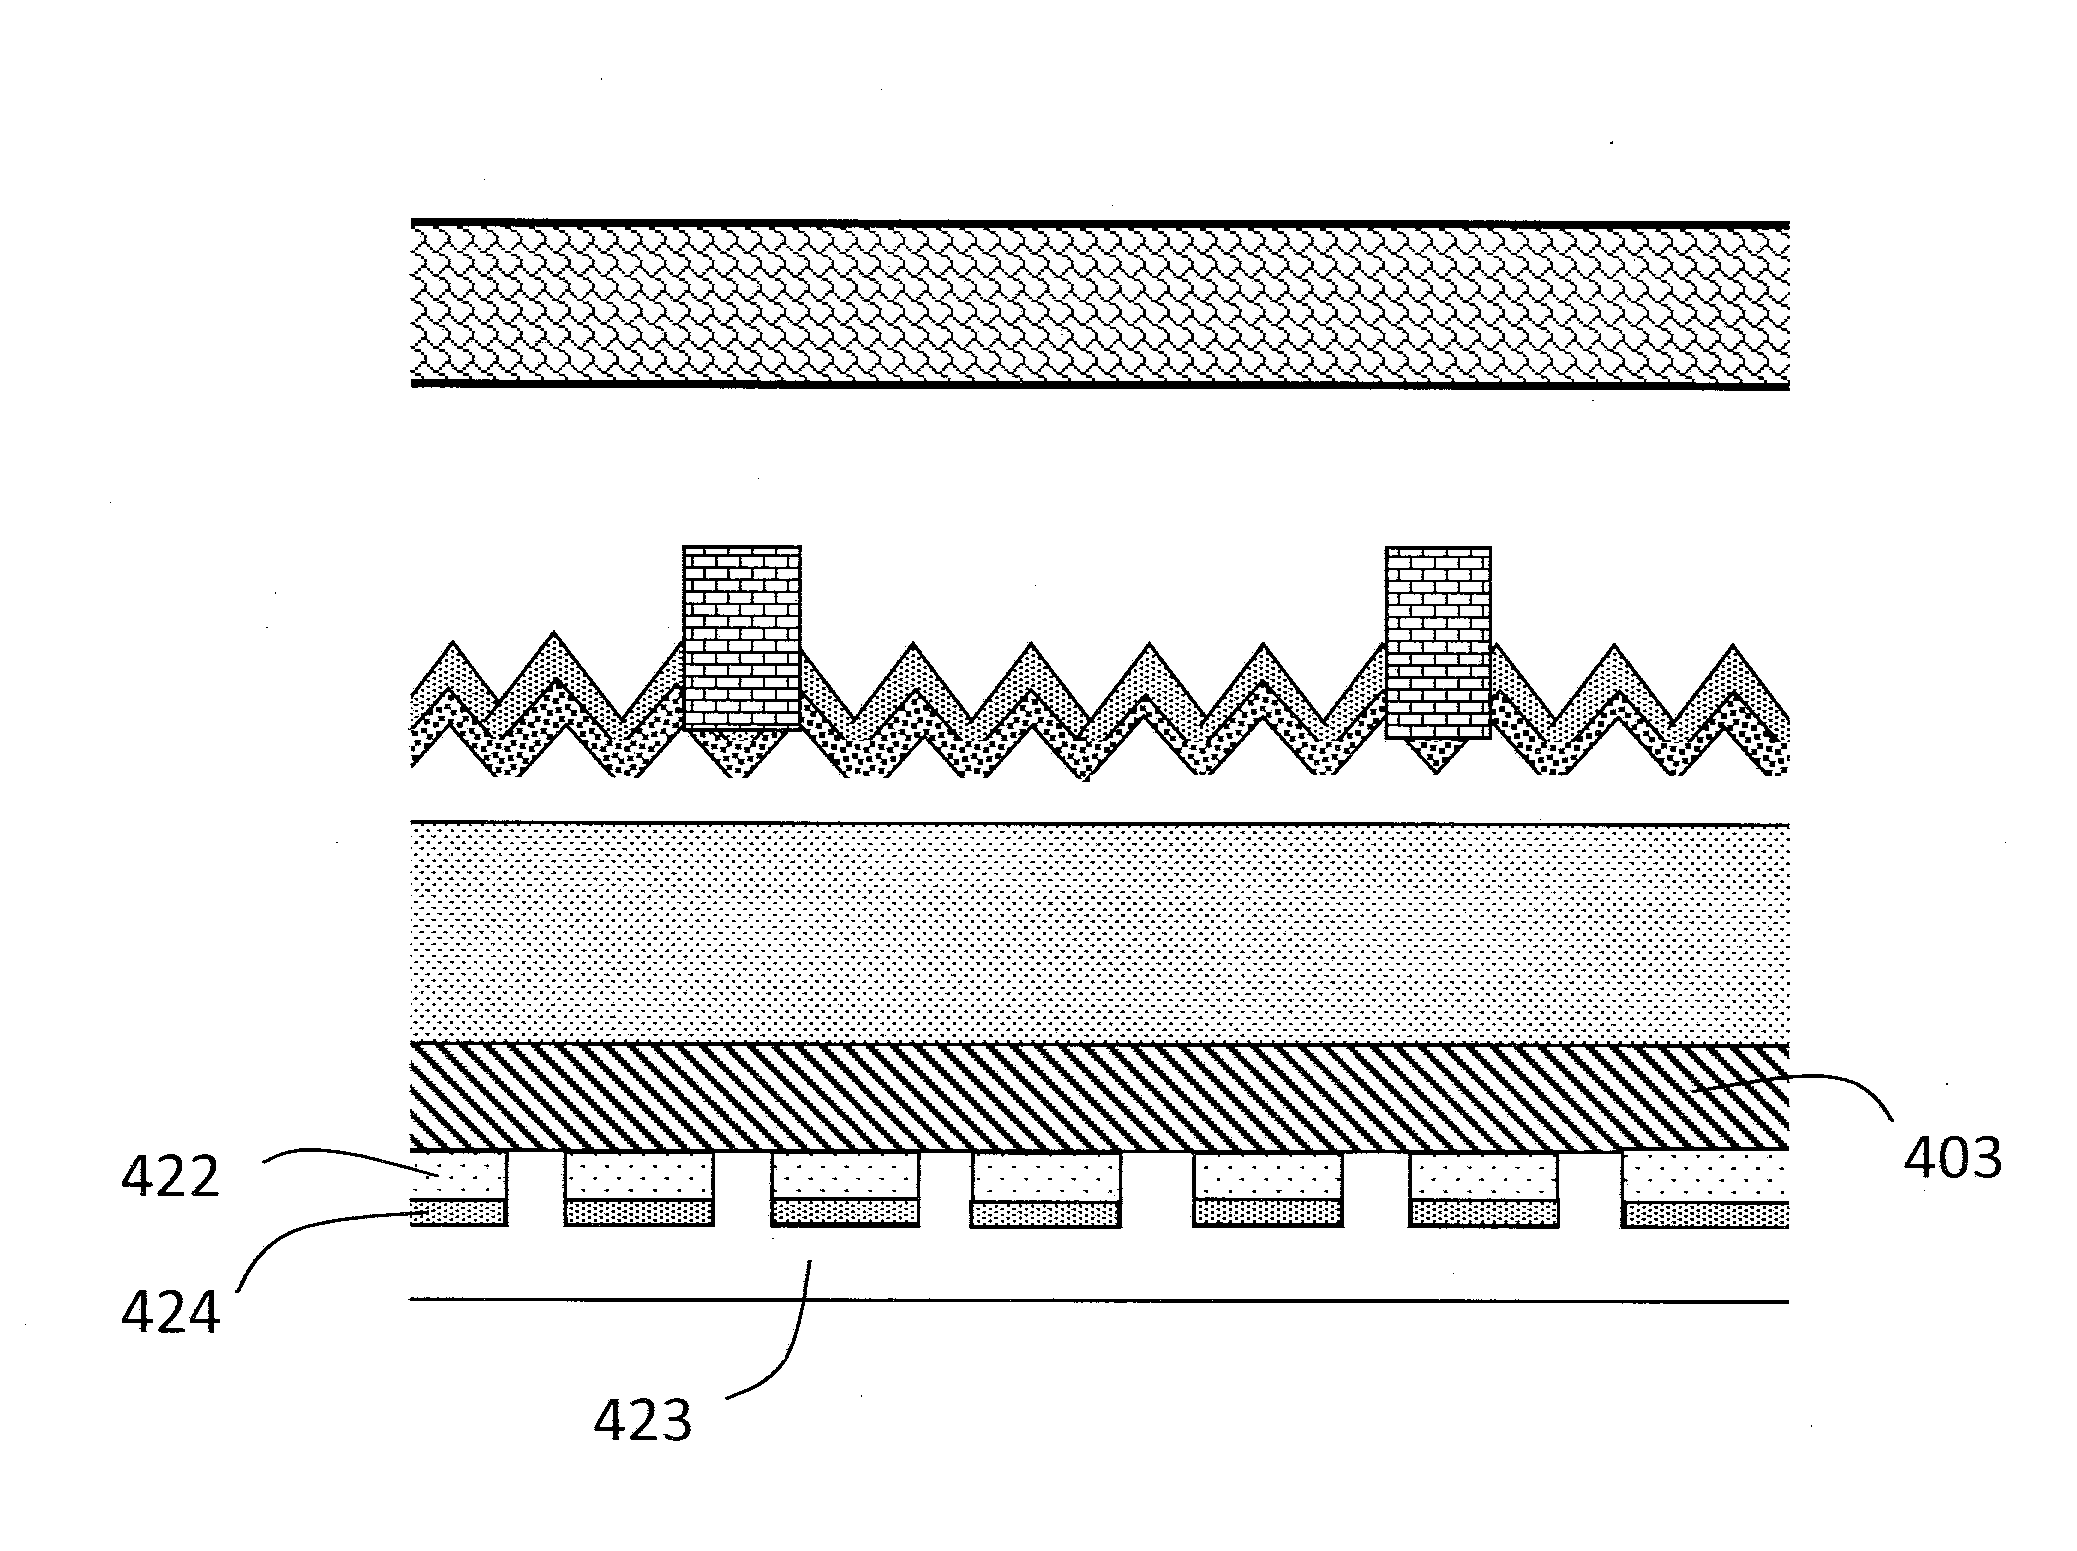 Passivated Emitter Rear Locally Patterned Epitaxial Solar Cell